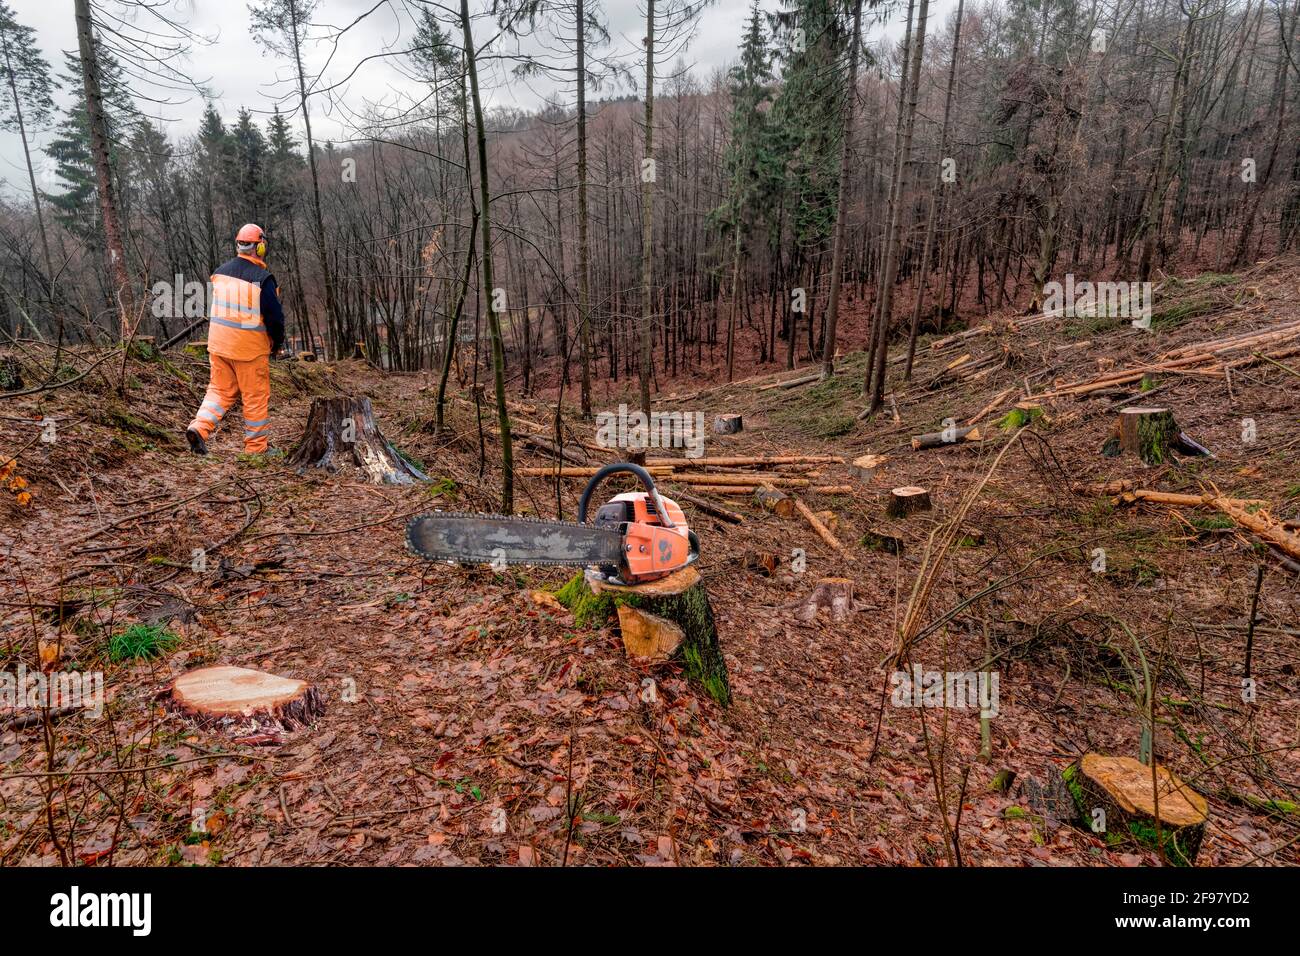 Forest workers during clearing work, Lower Saxony, Germany Stock Photo